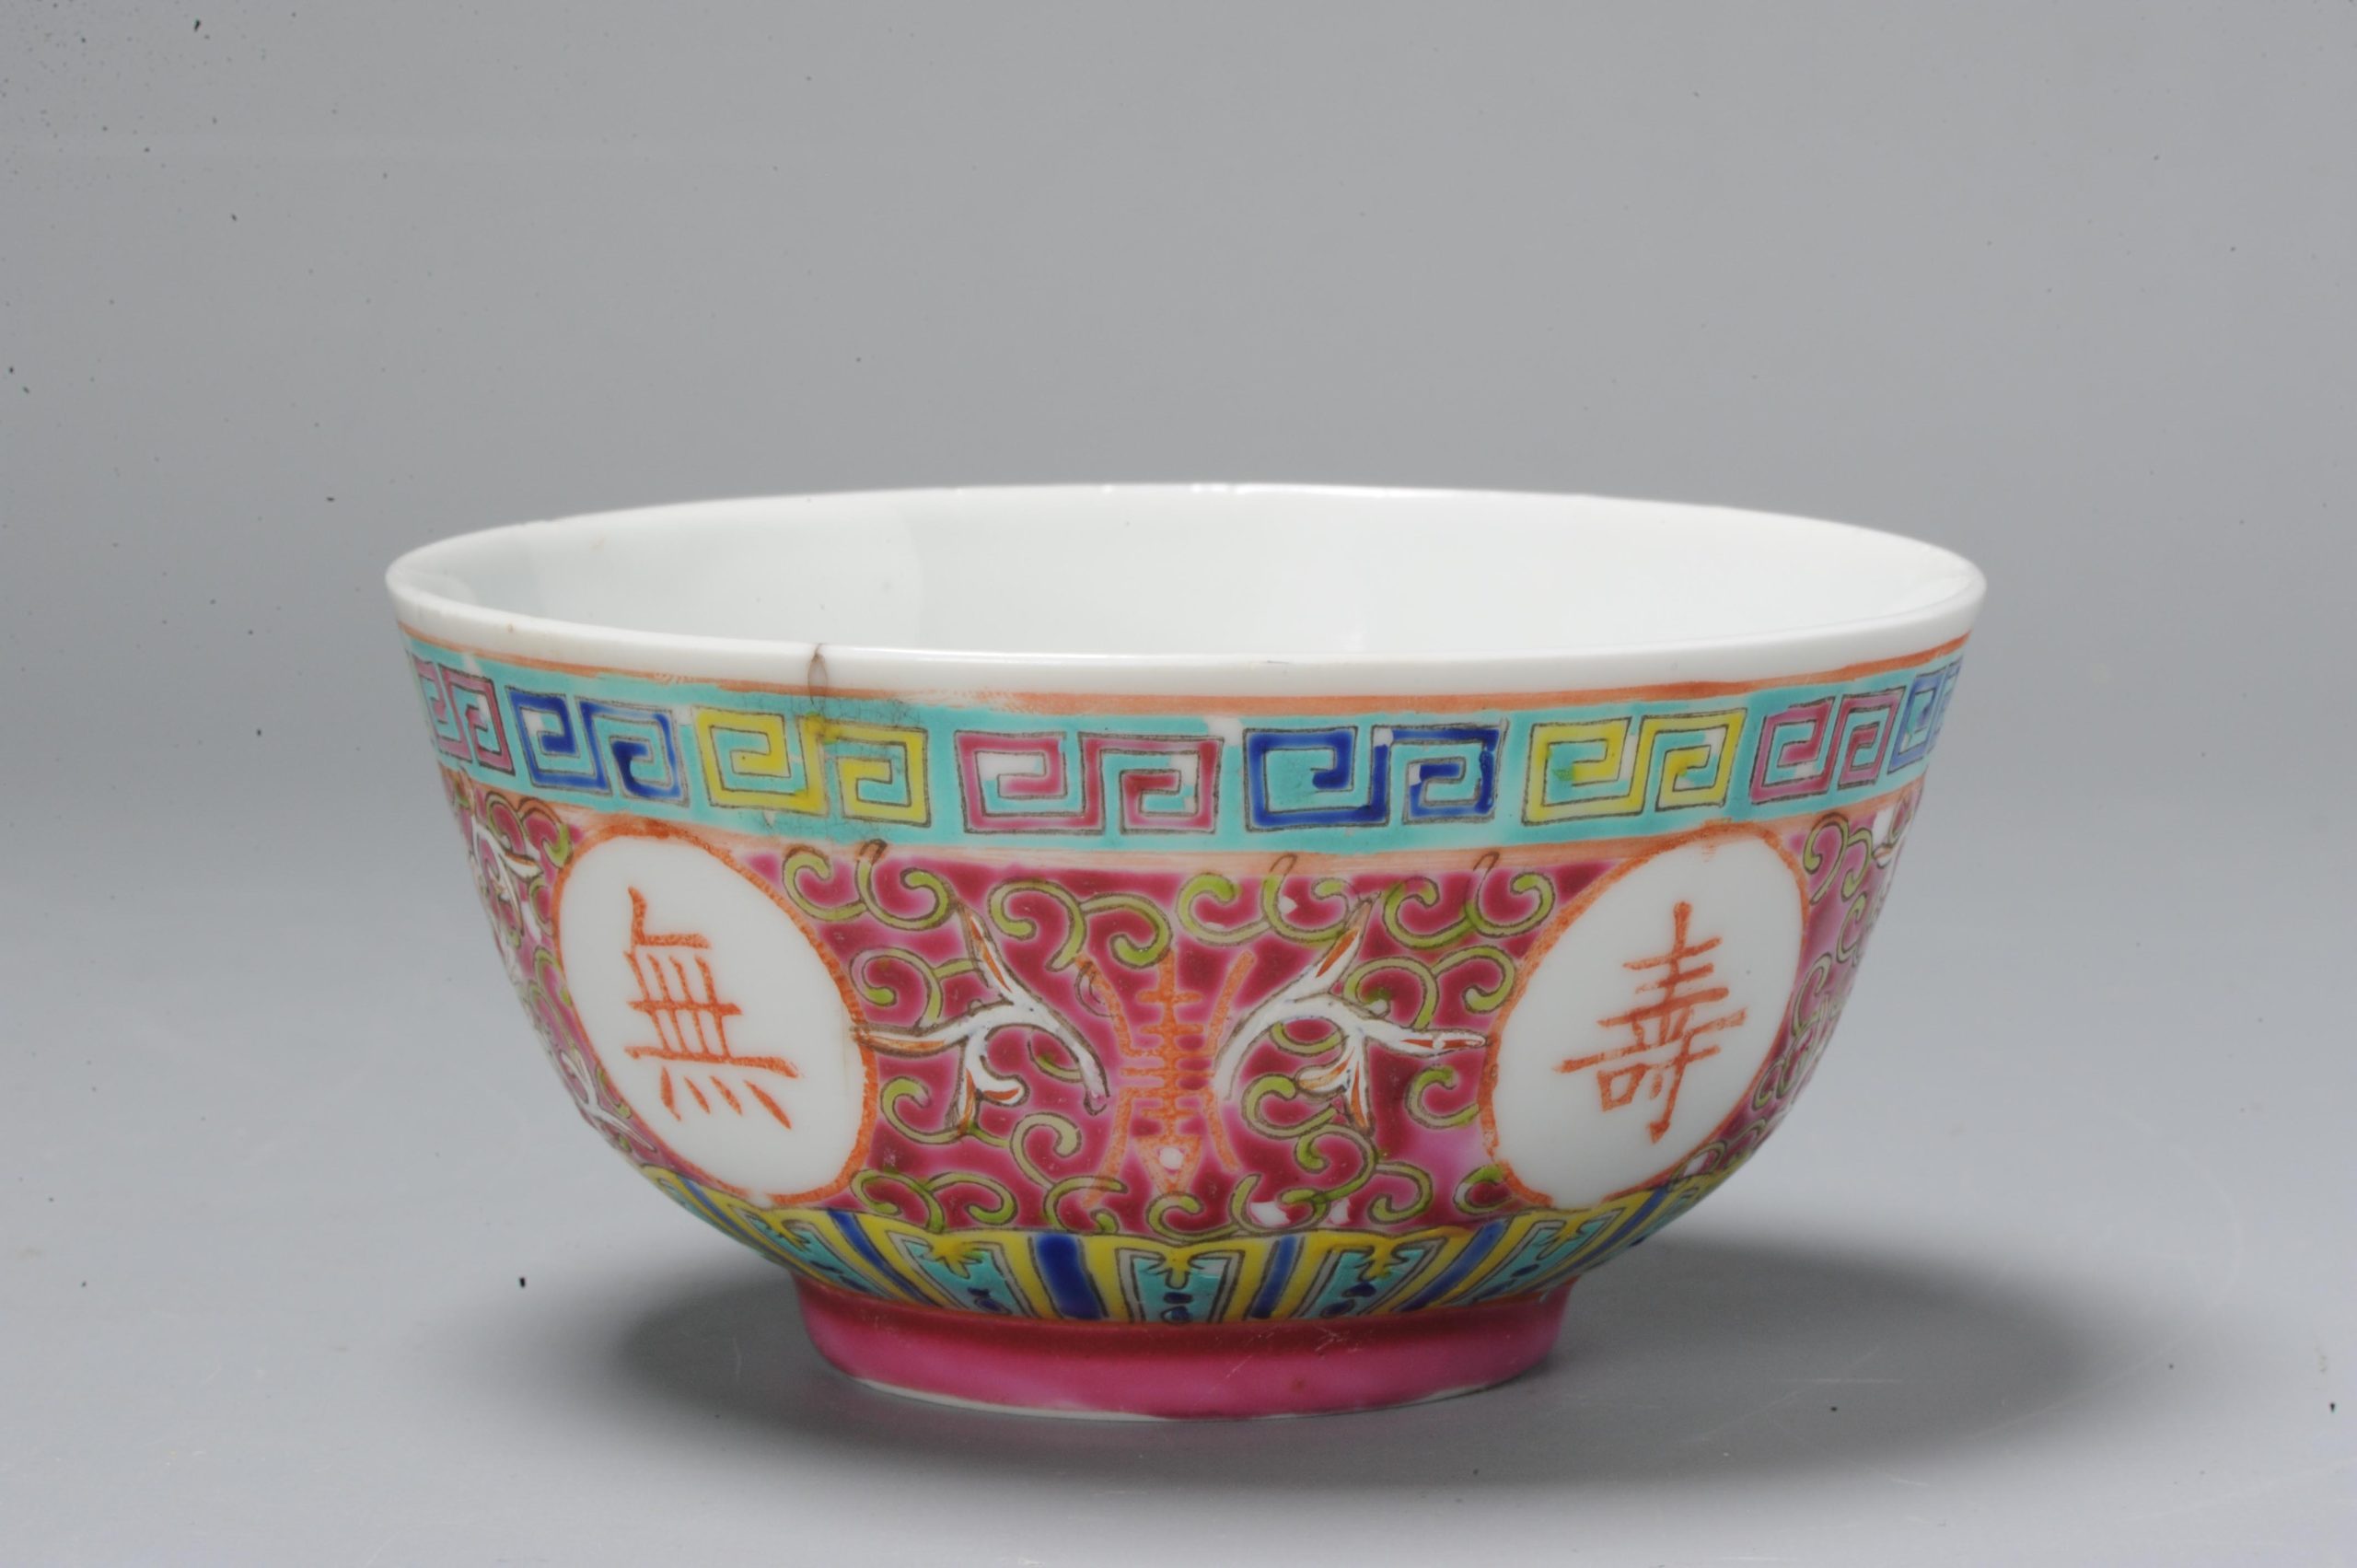 Antique Chinese PROC Famille rose bowl with flowers and Symbols, China 20th c.